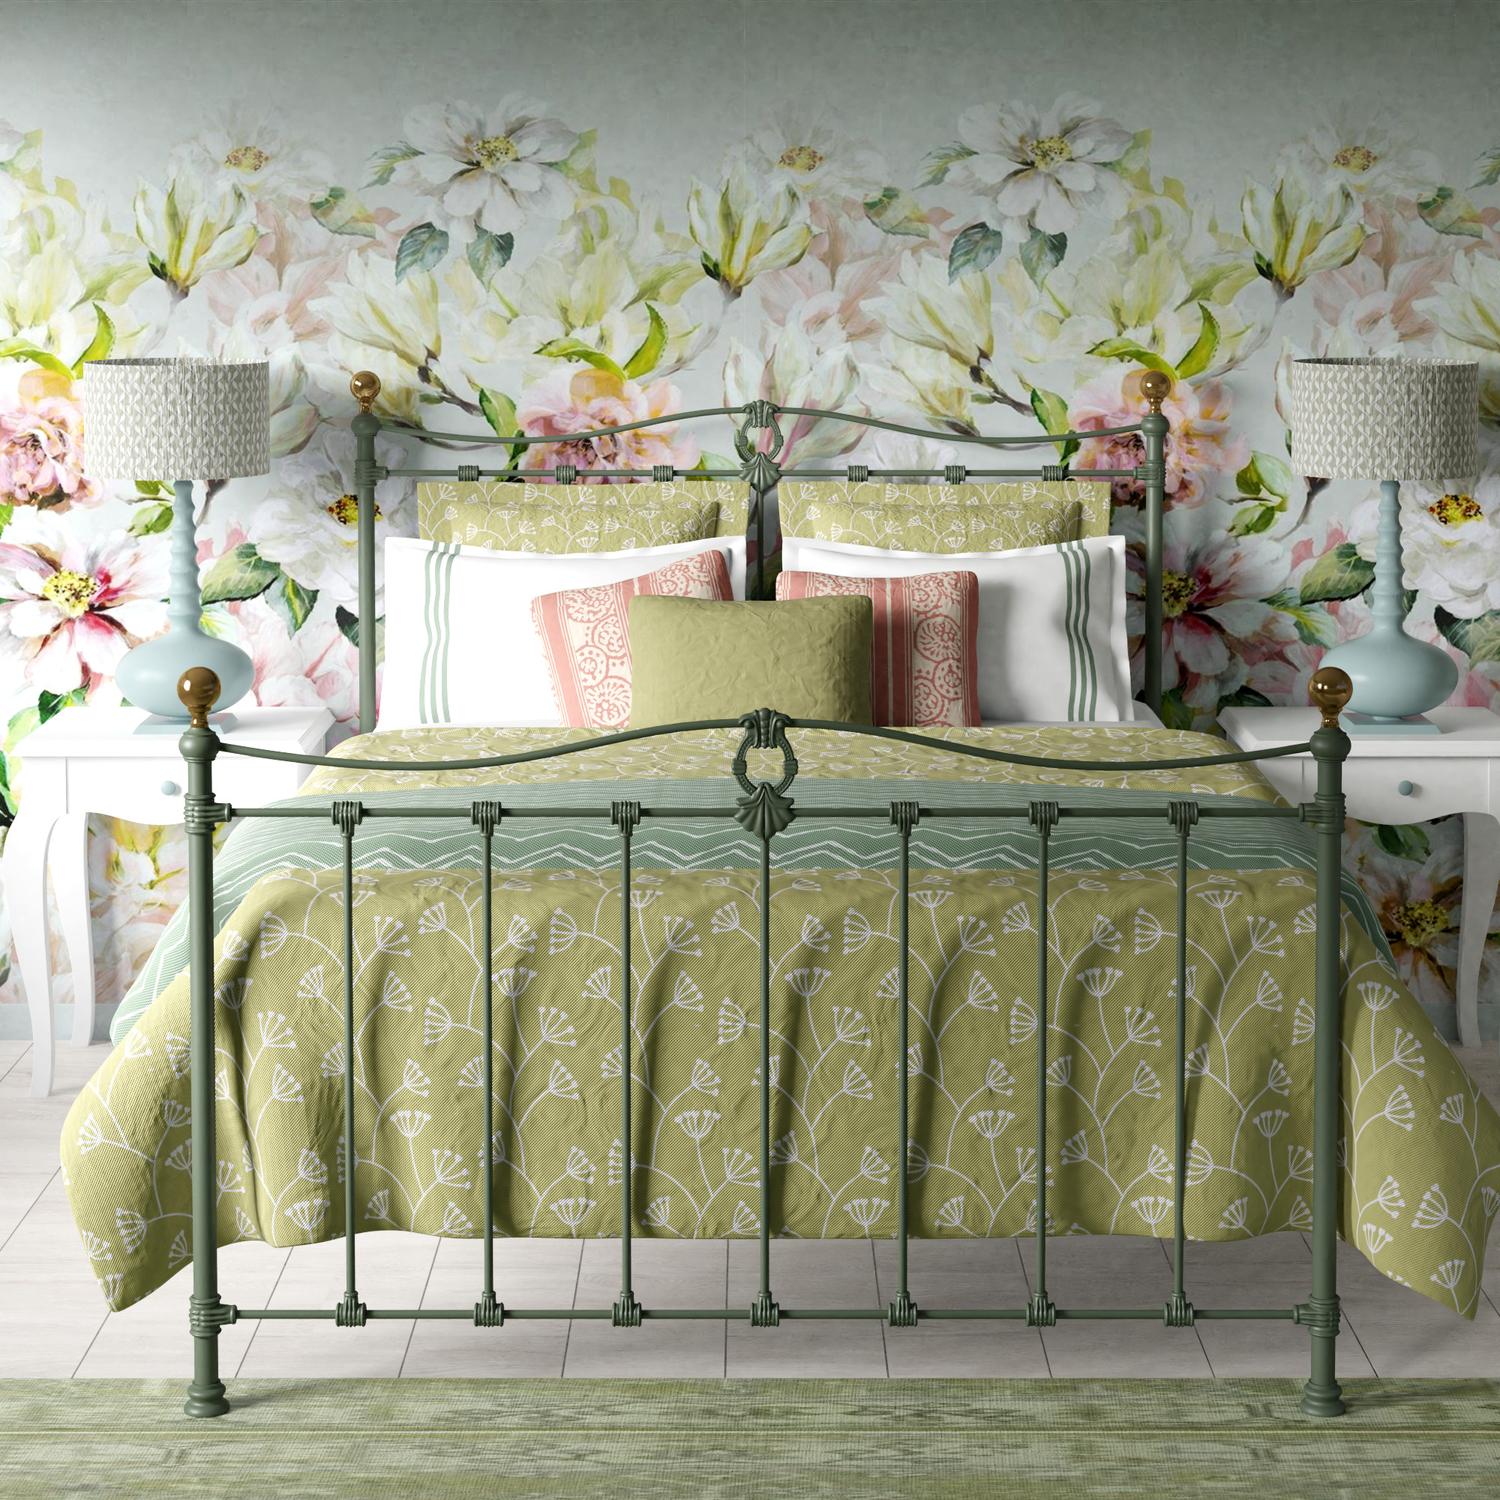 Tulsk iron bed - Image green